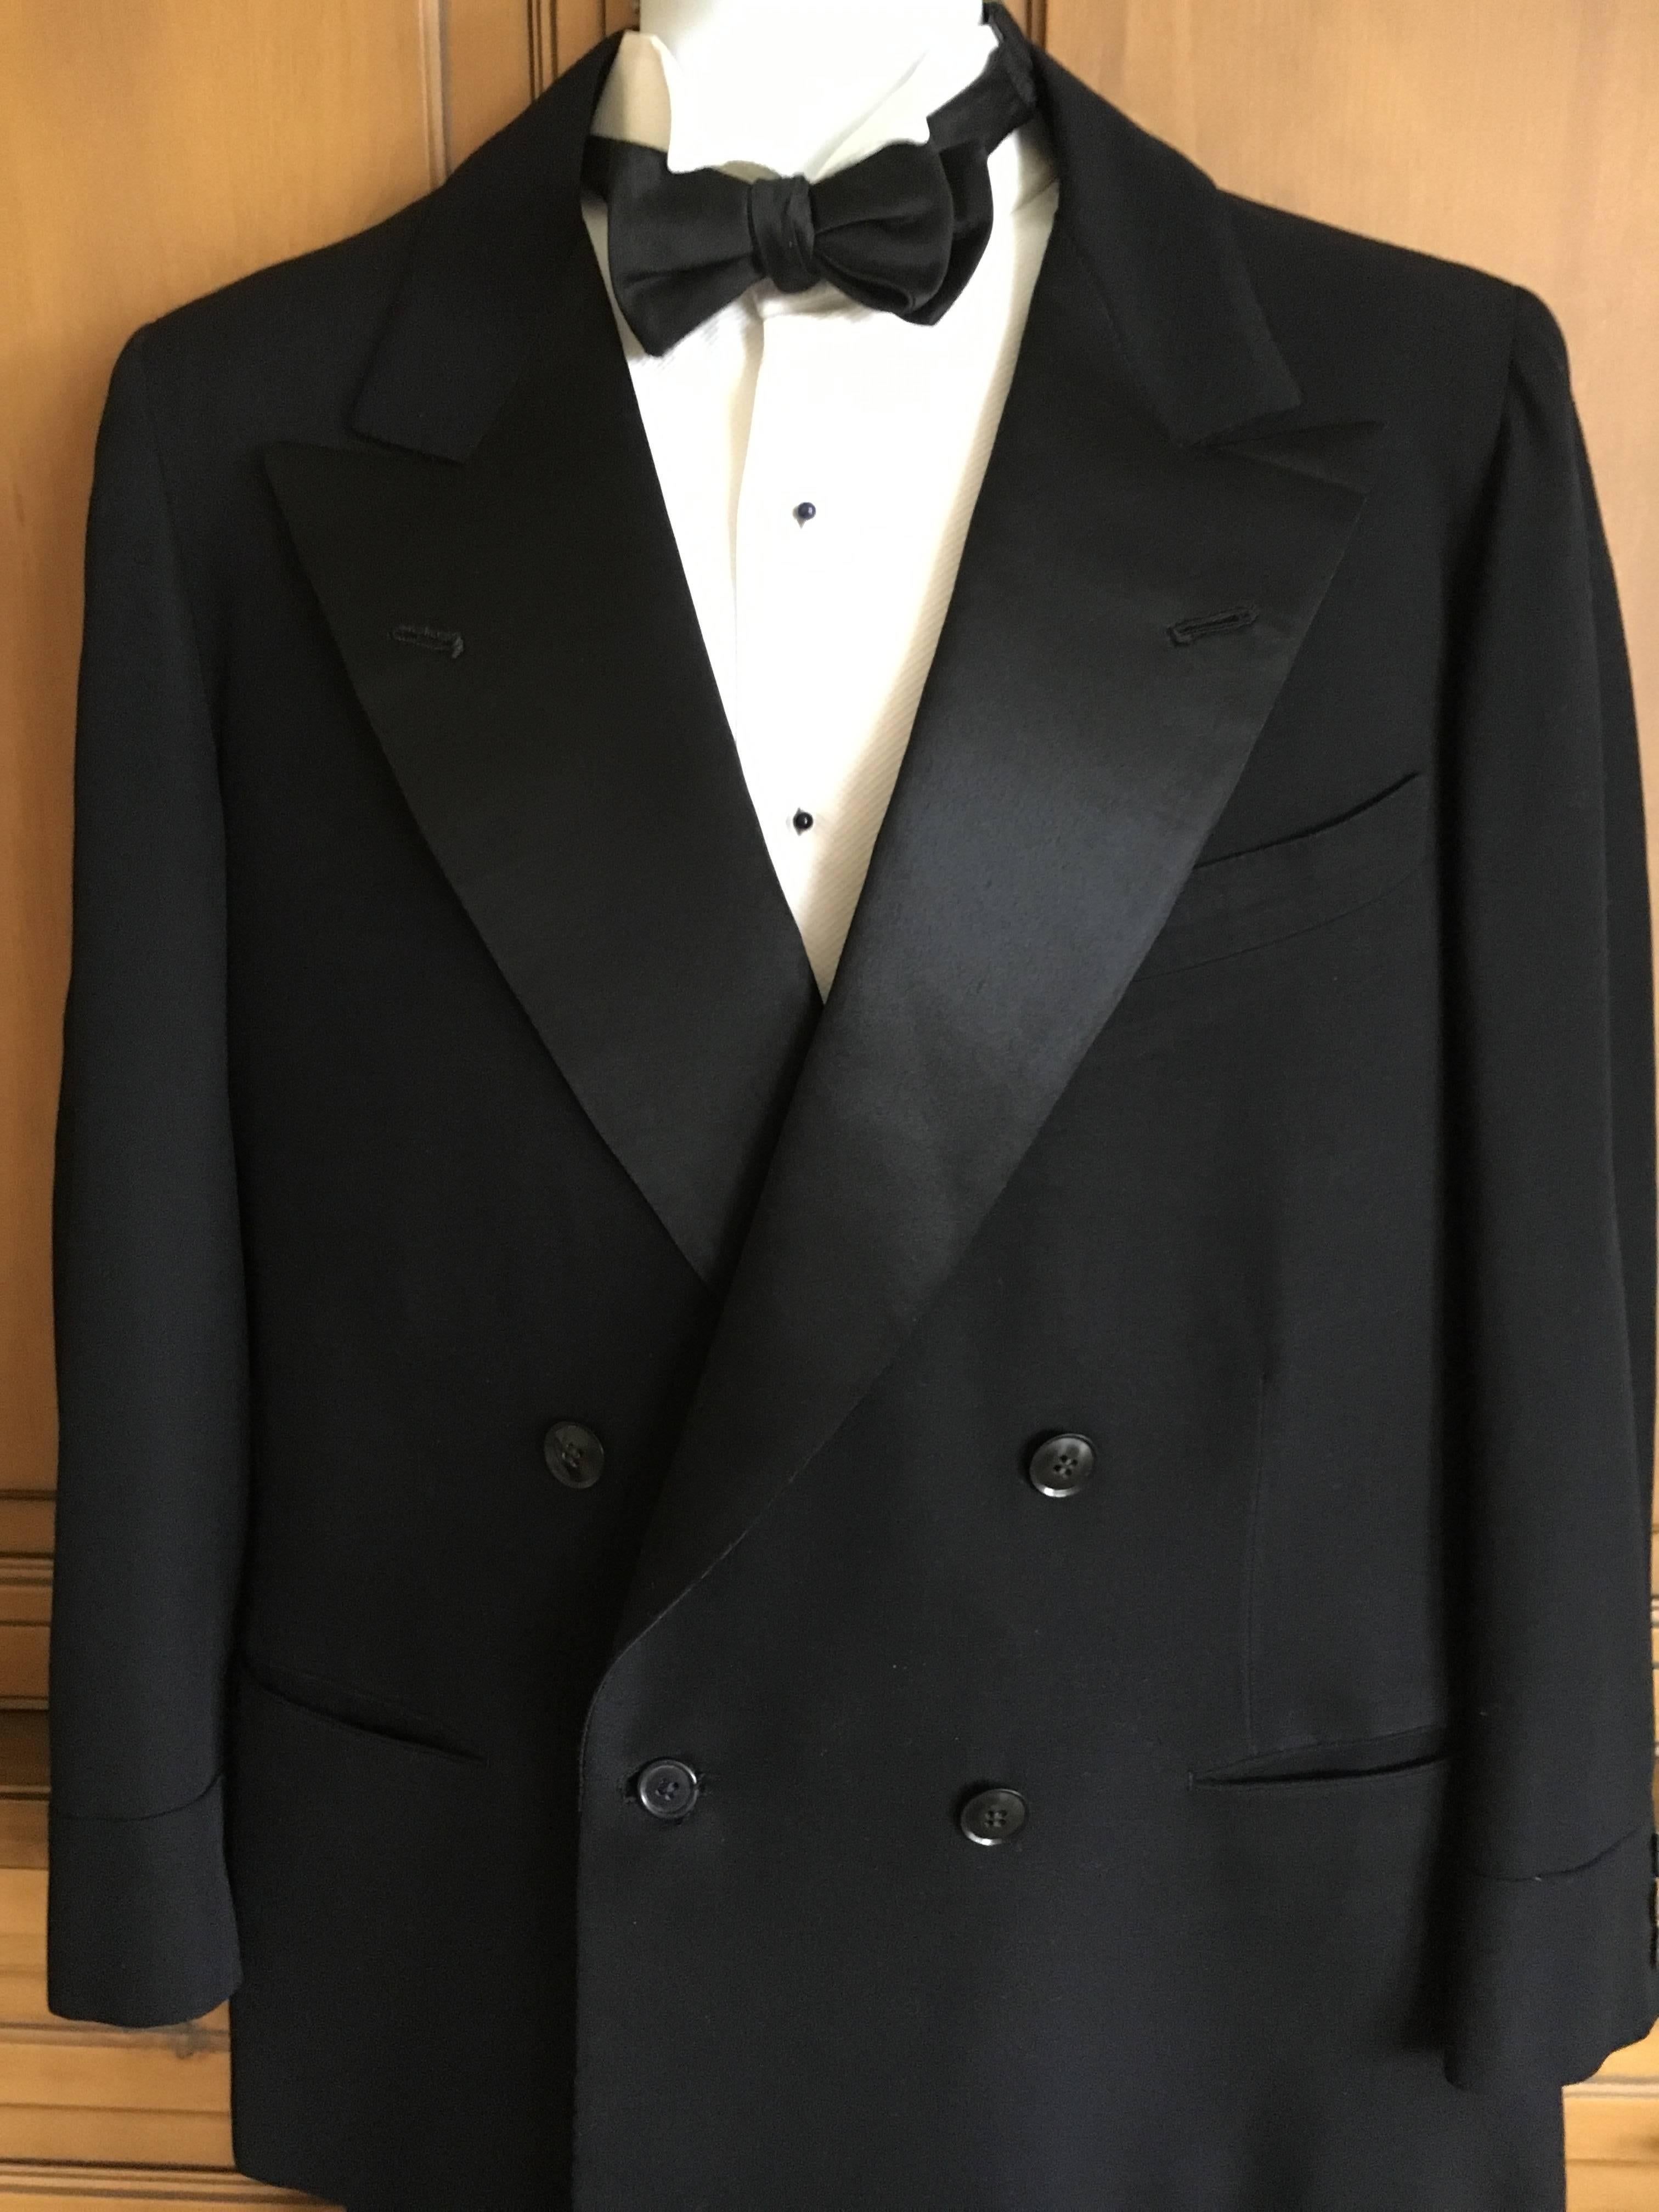 1936 Gentleman's Peak Satin Lapel Tuxedo from Society Tailor F.L. Dunne & Co. NY In Excellent Condition For Sale In Cloverdale, CA